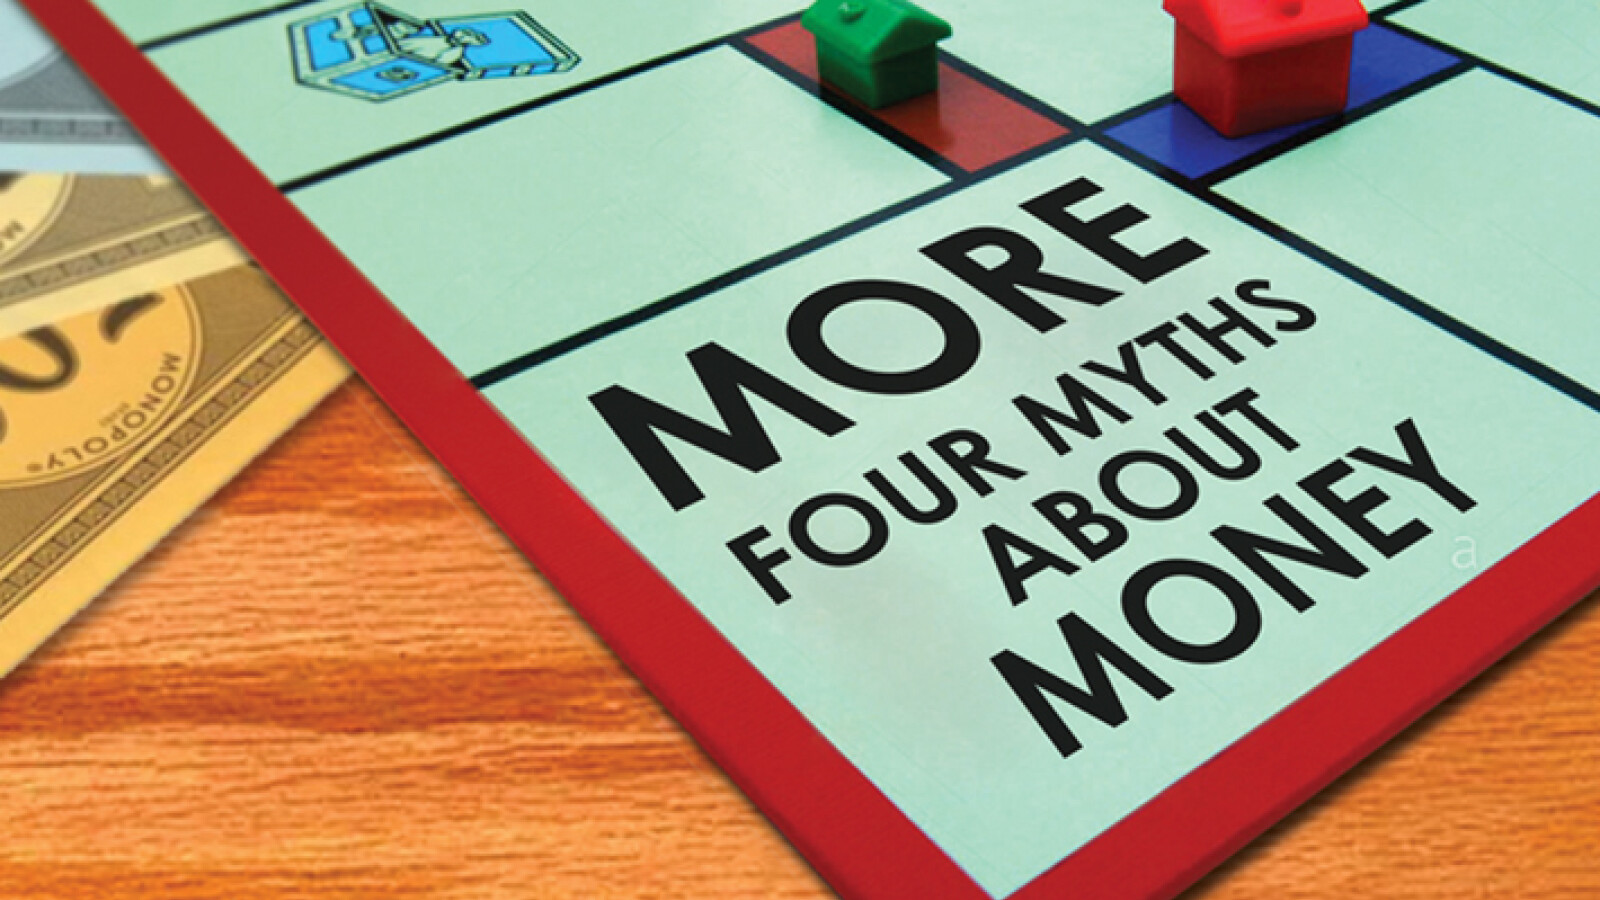 More - Four Myths About Money